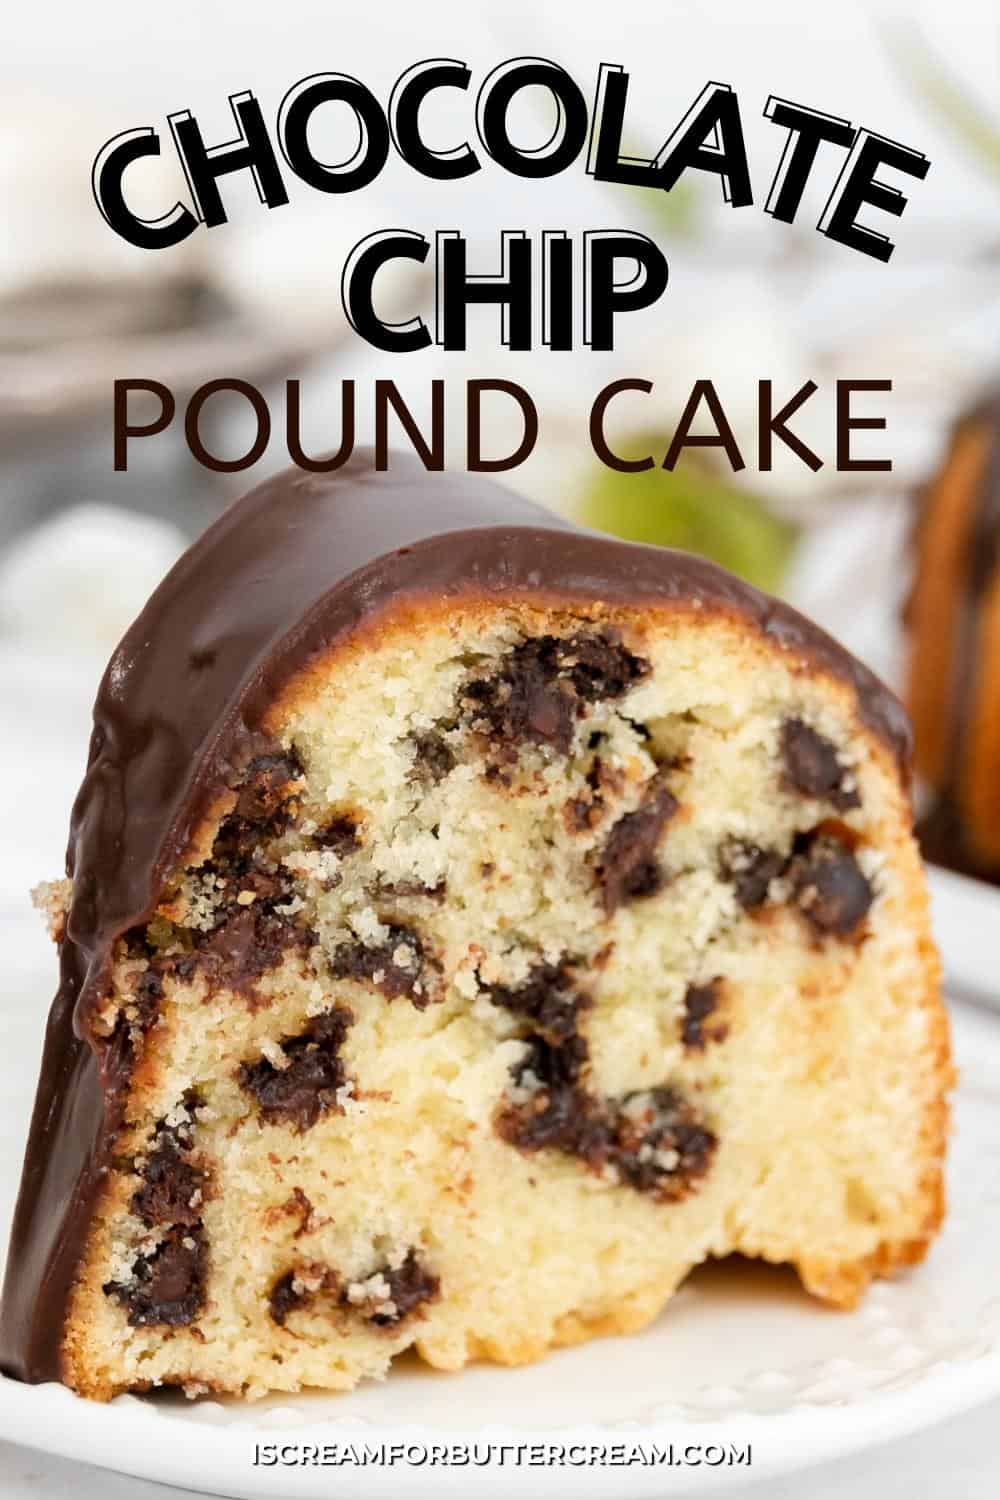 Pin graphic with close up view of chocolate chip sour cream cake.